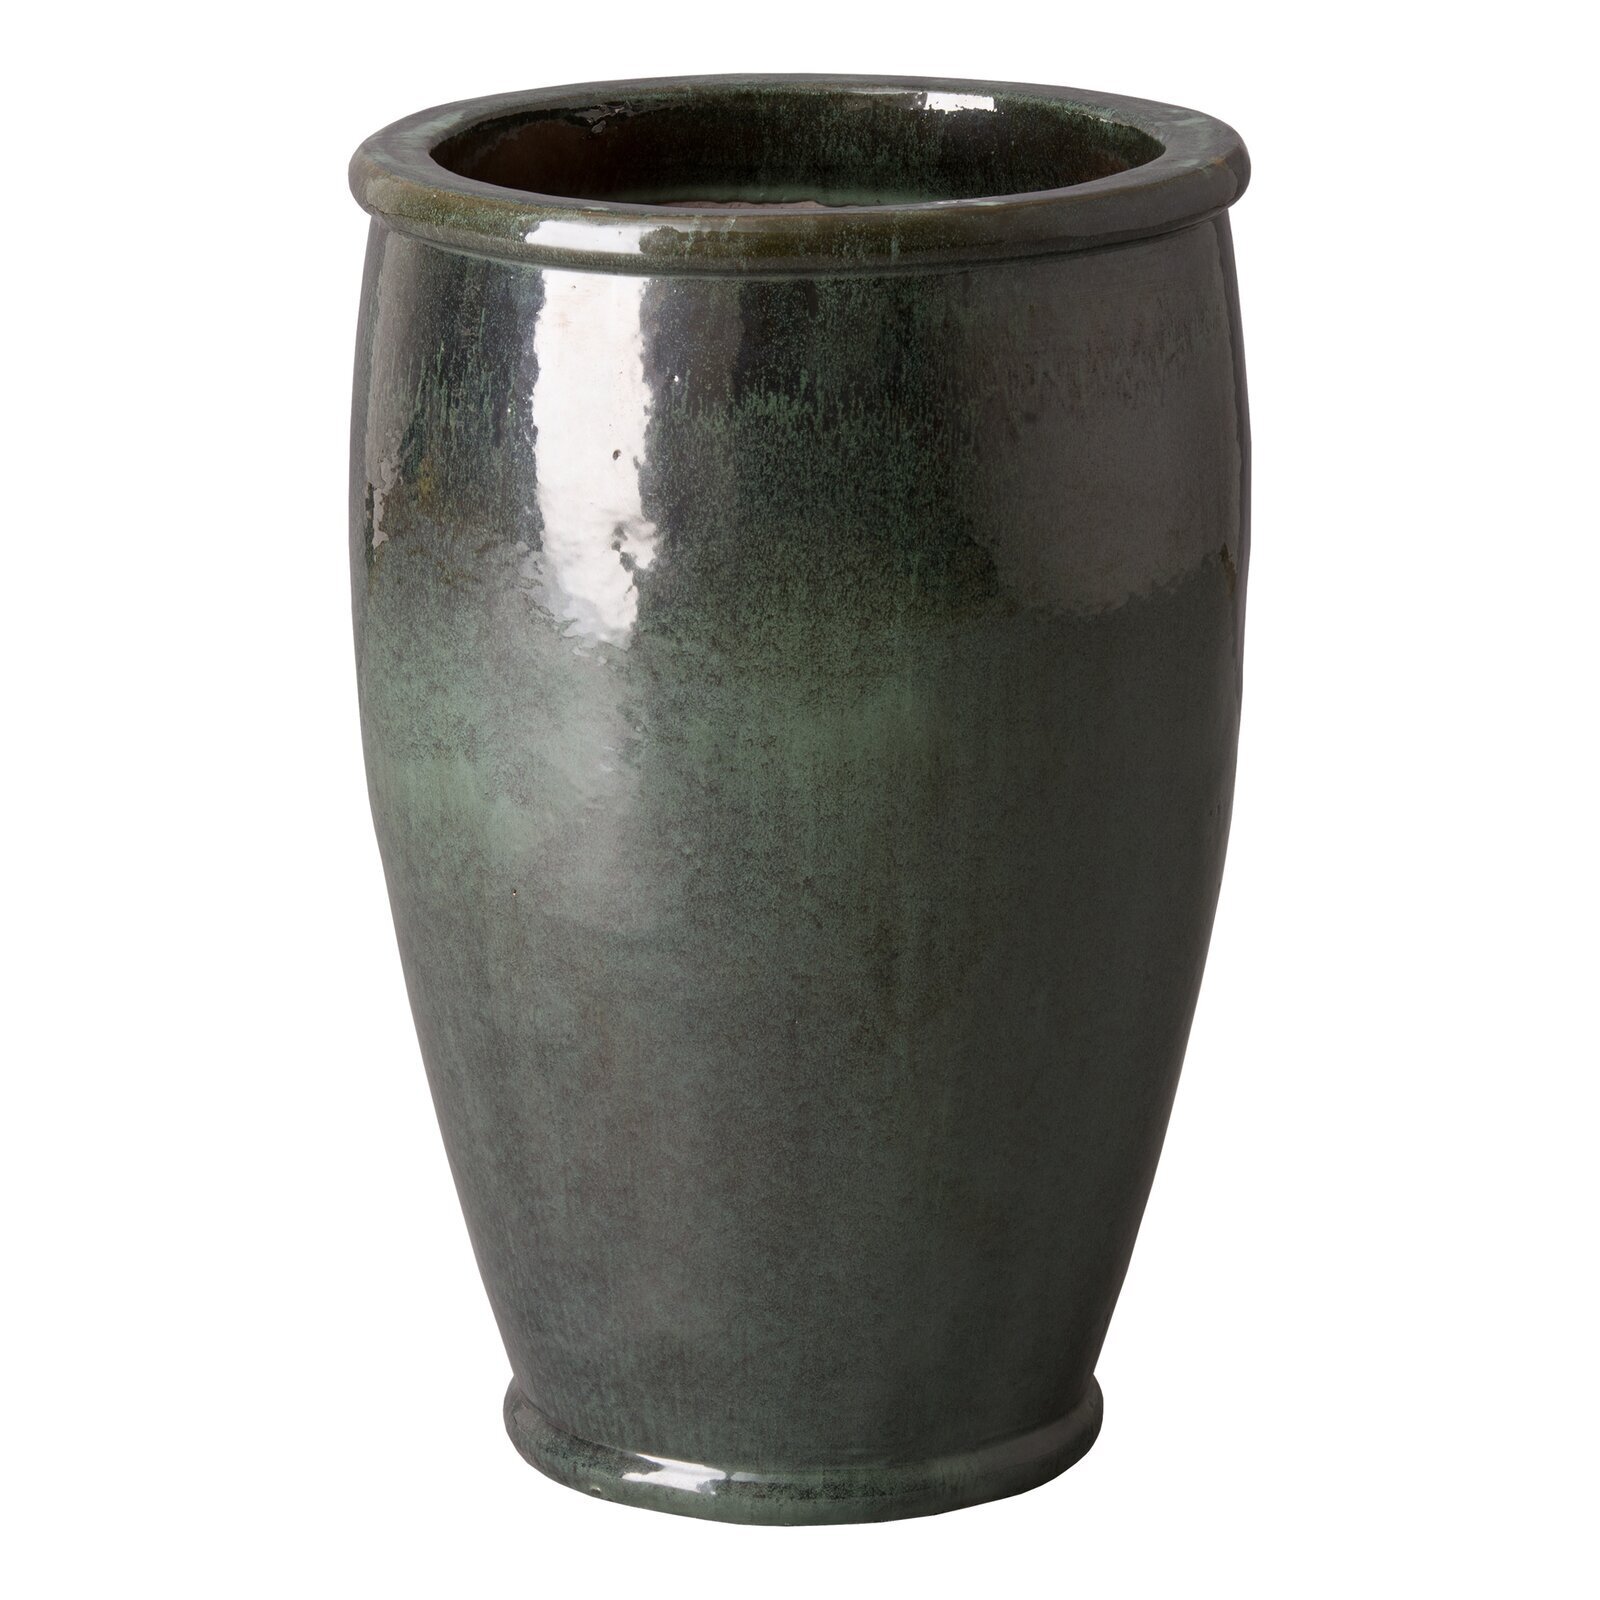 Deep Green Extra large Ceramic Planters for Outside or Inside